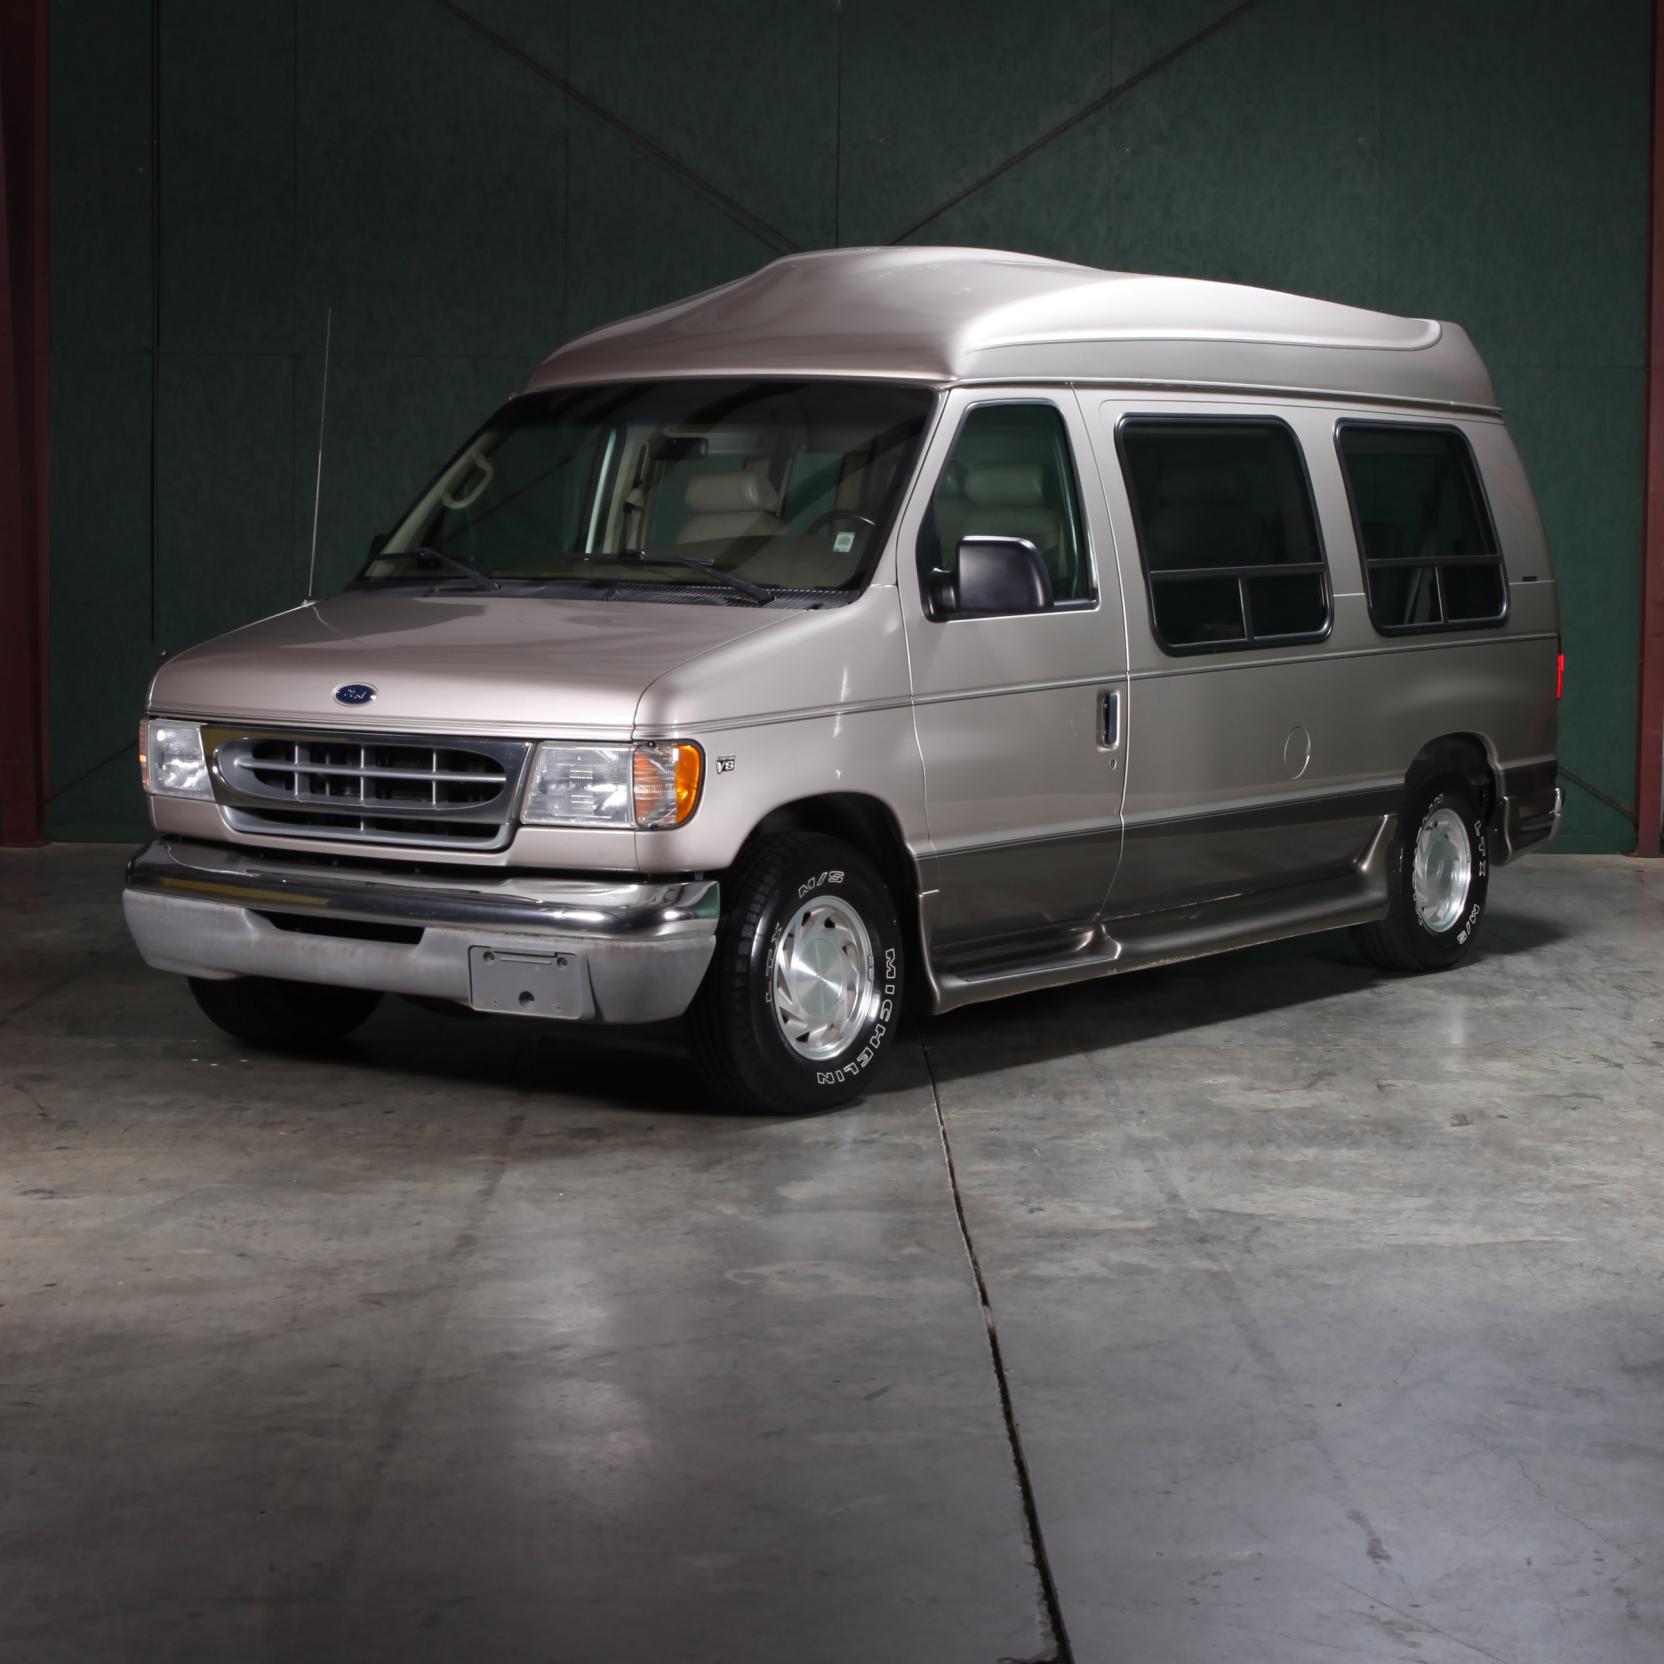 One-Family Owned 2001 Ford E-150 Hightop Conversion Van by Sleekstar (Lot  341 - Labor Day Gallery AuctionSep 2, 2019, 9:00am)